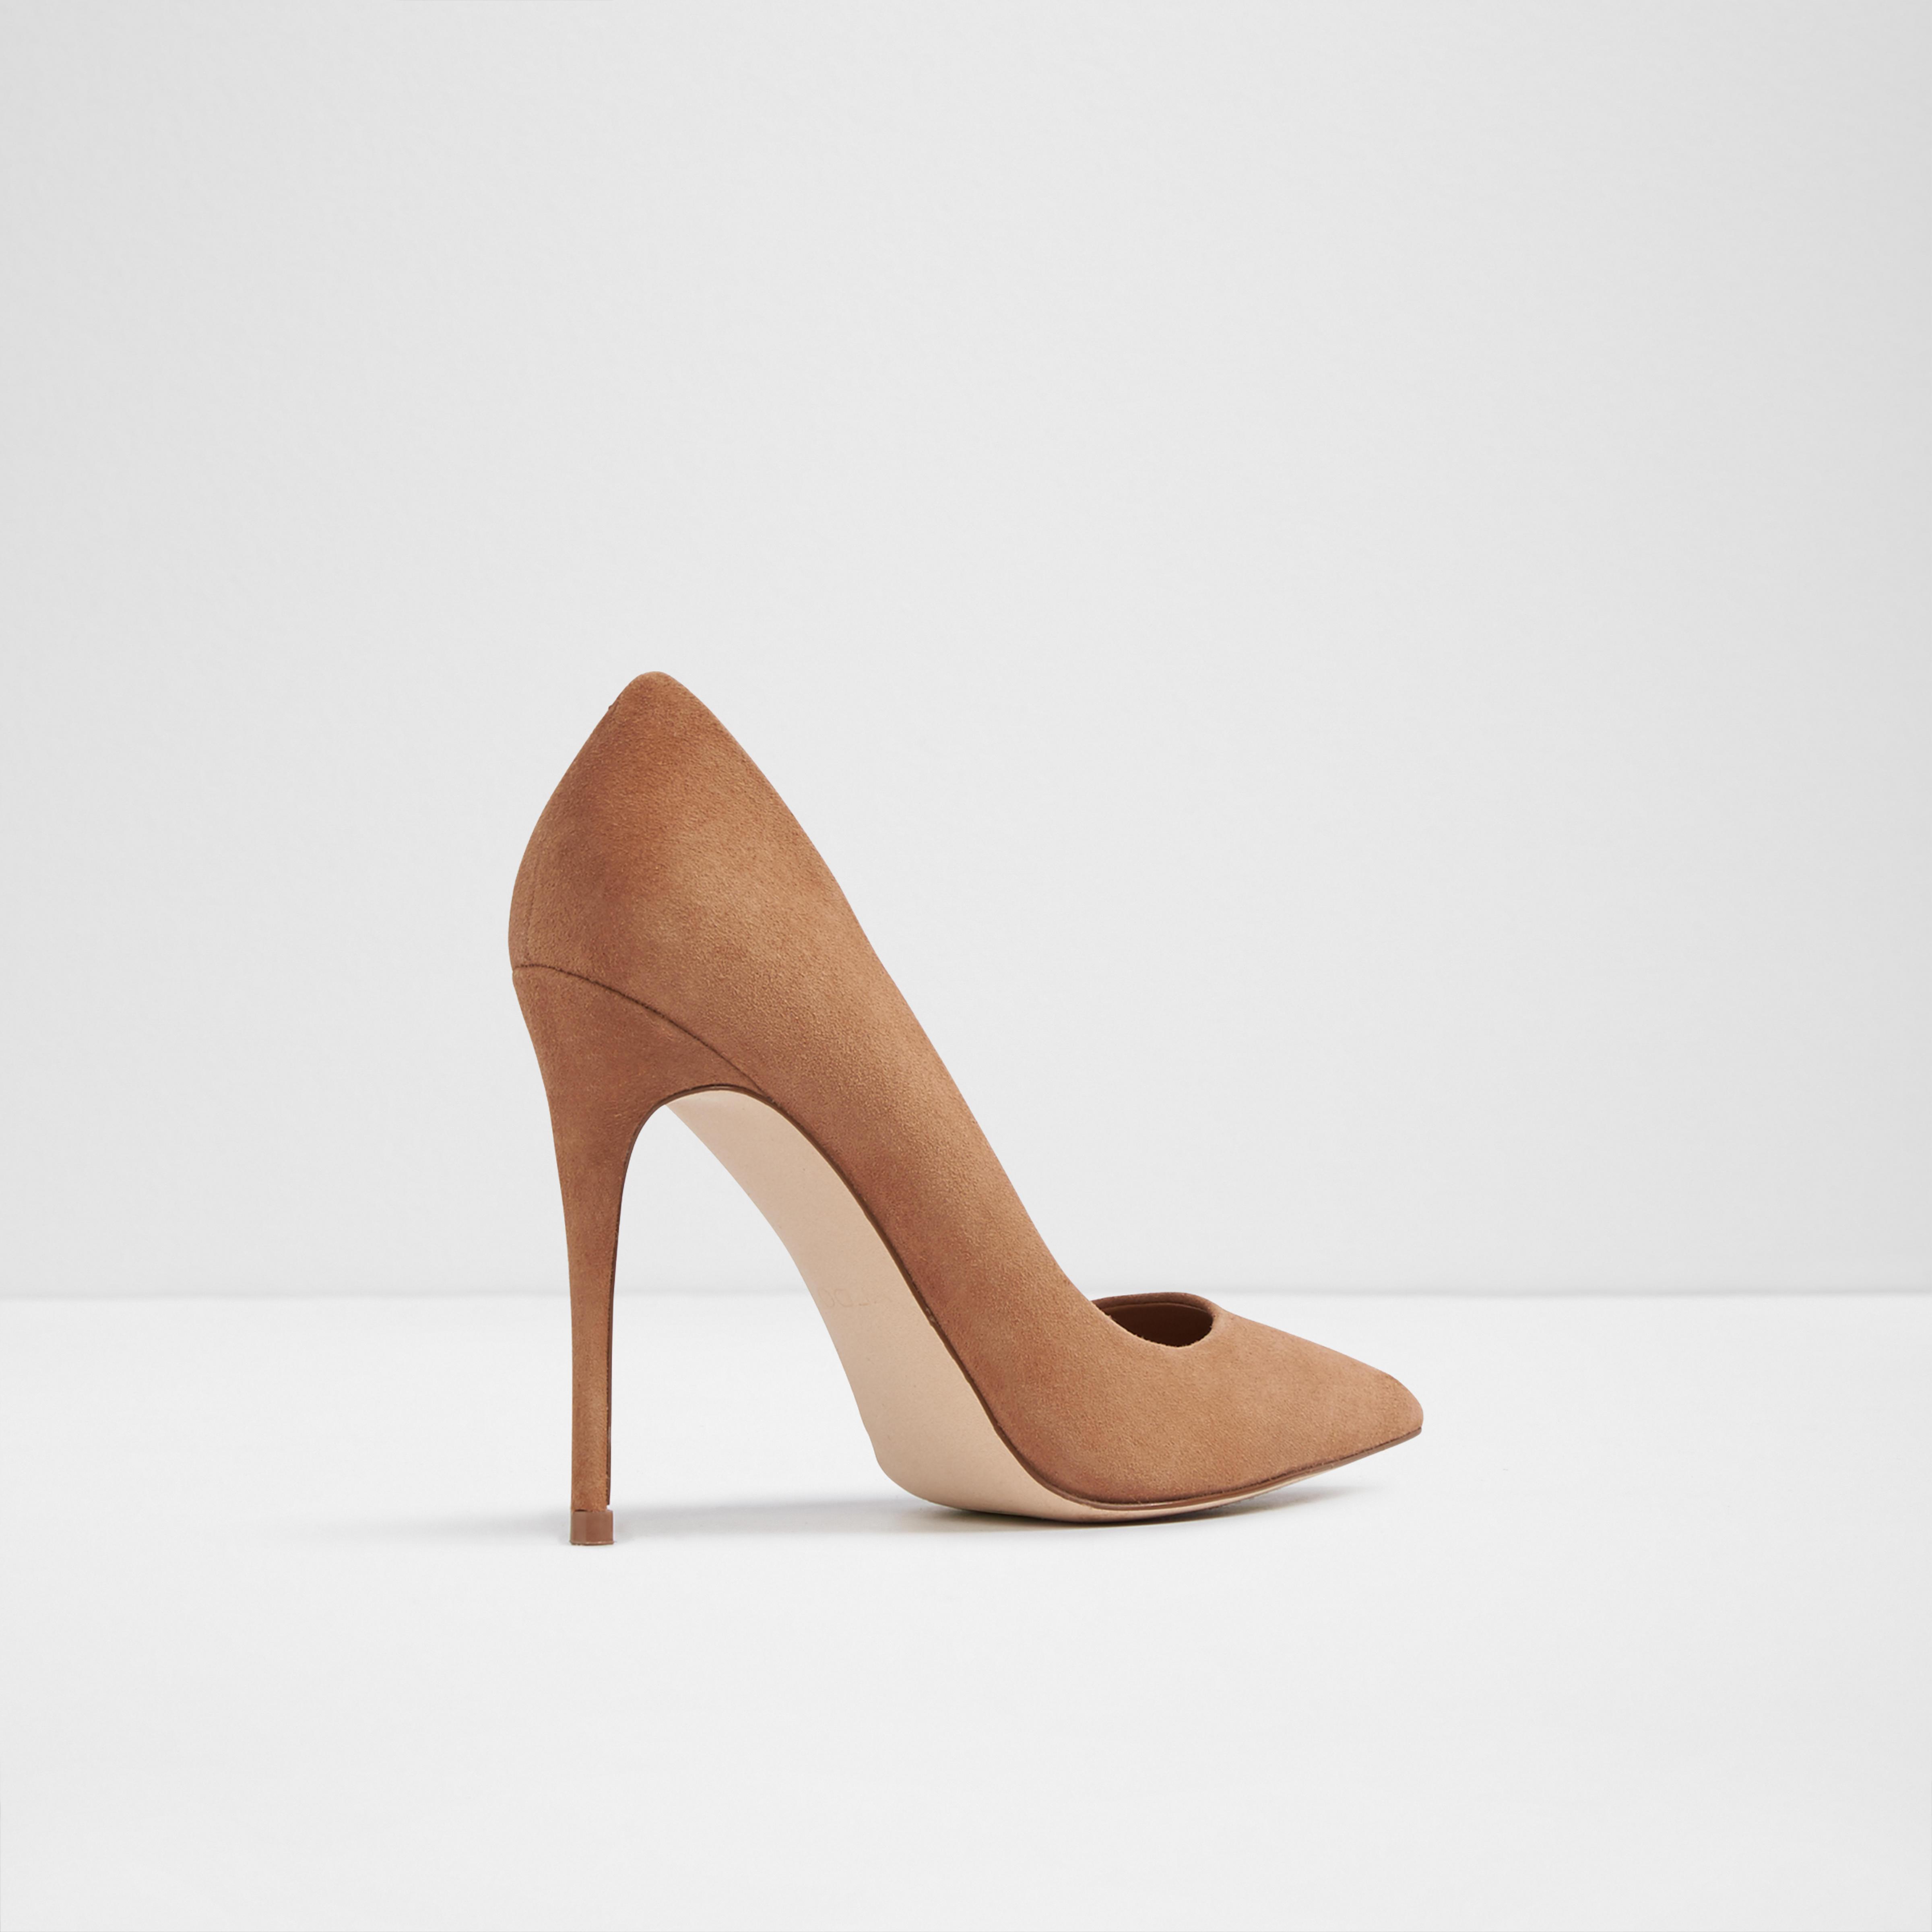 ALDO Synthetic Stessy in Light Brown (Brown) - Lyst